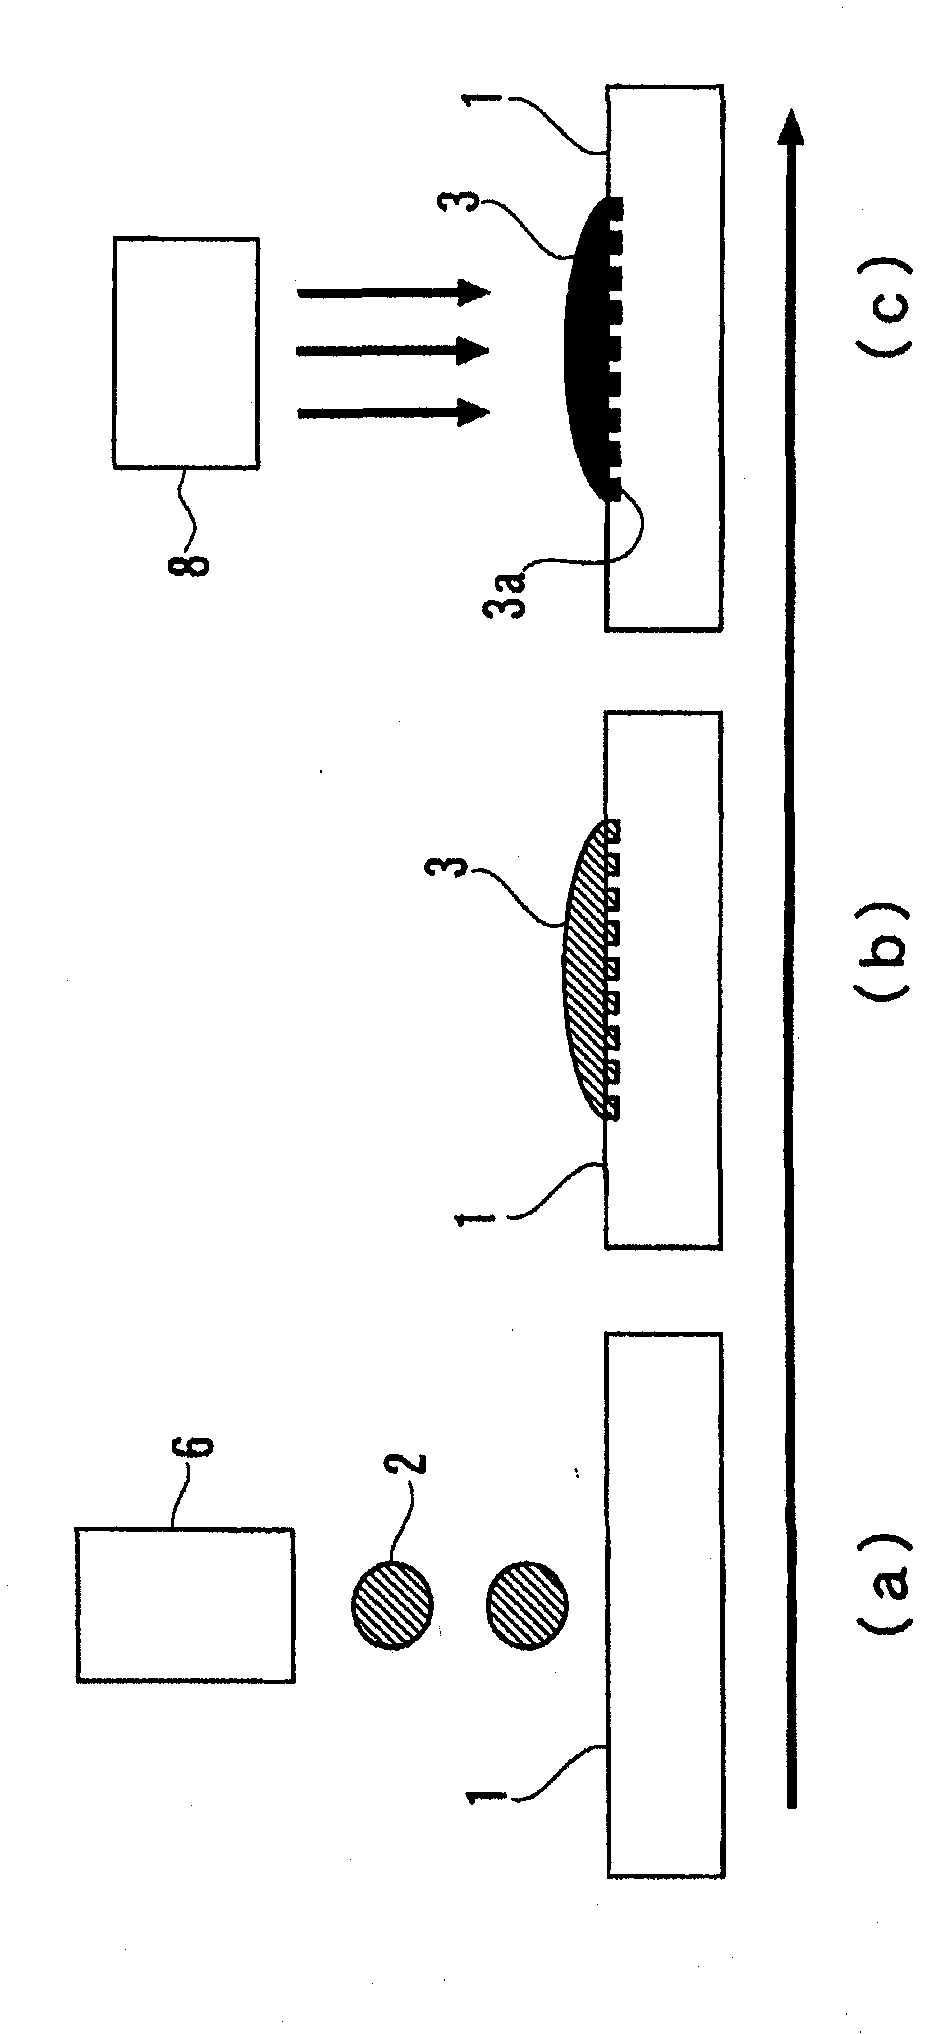 Light guide plate, and method for producing the same